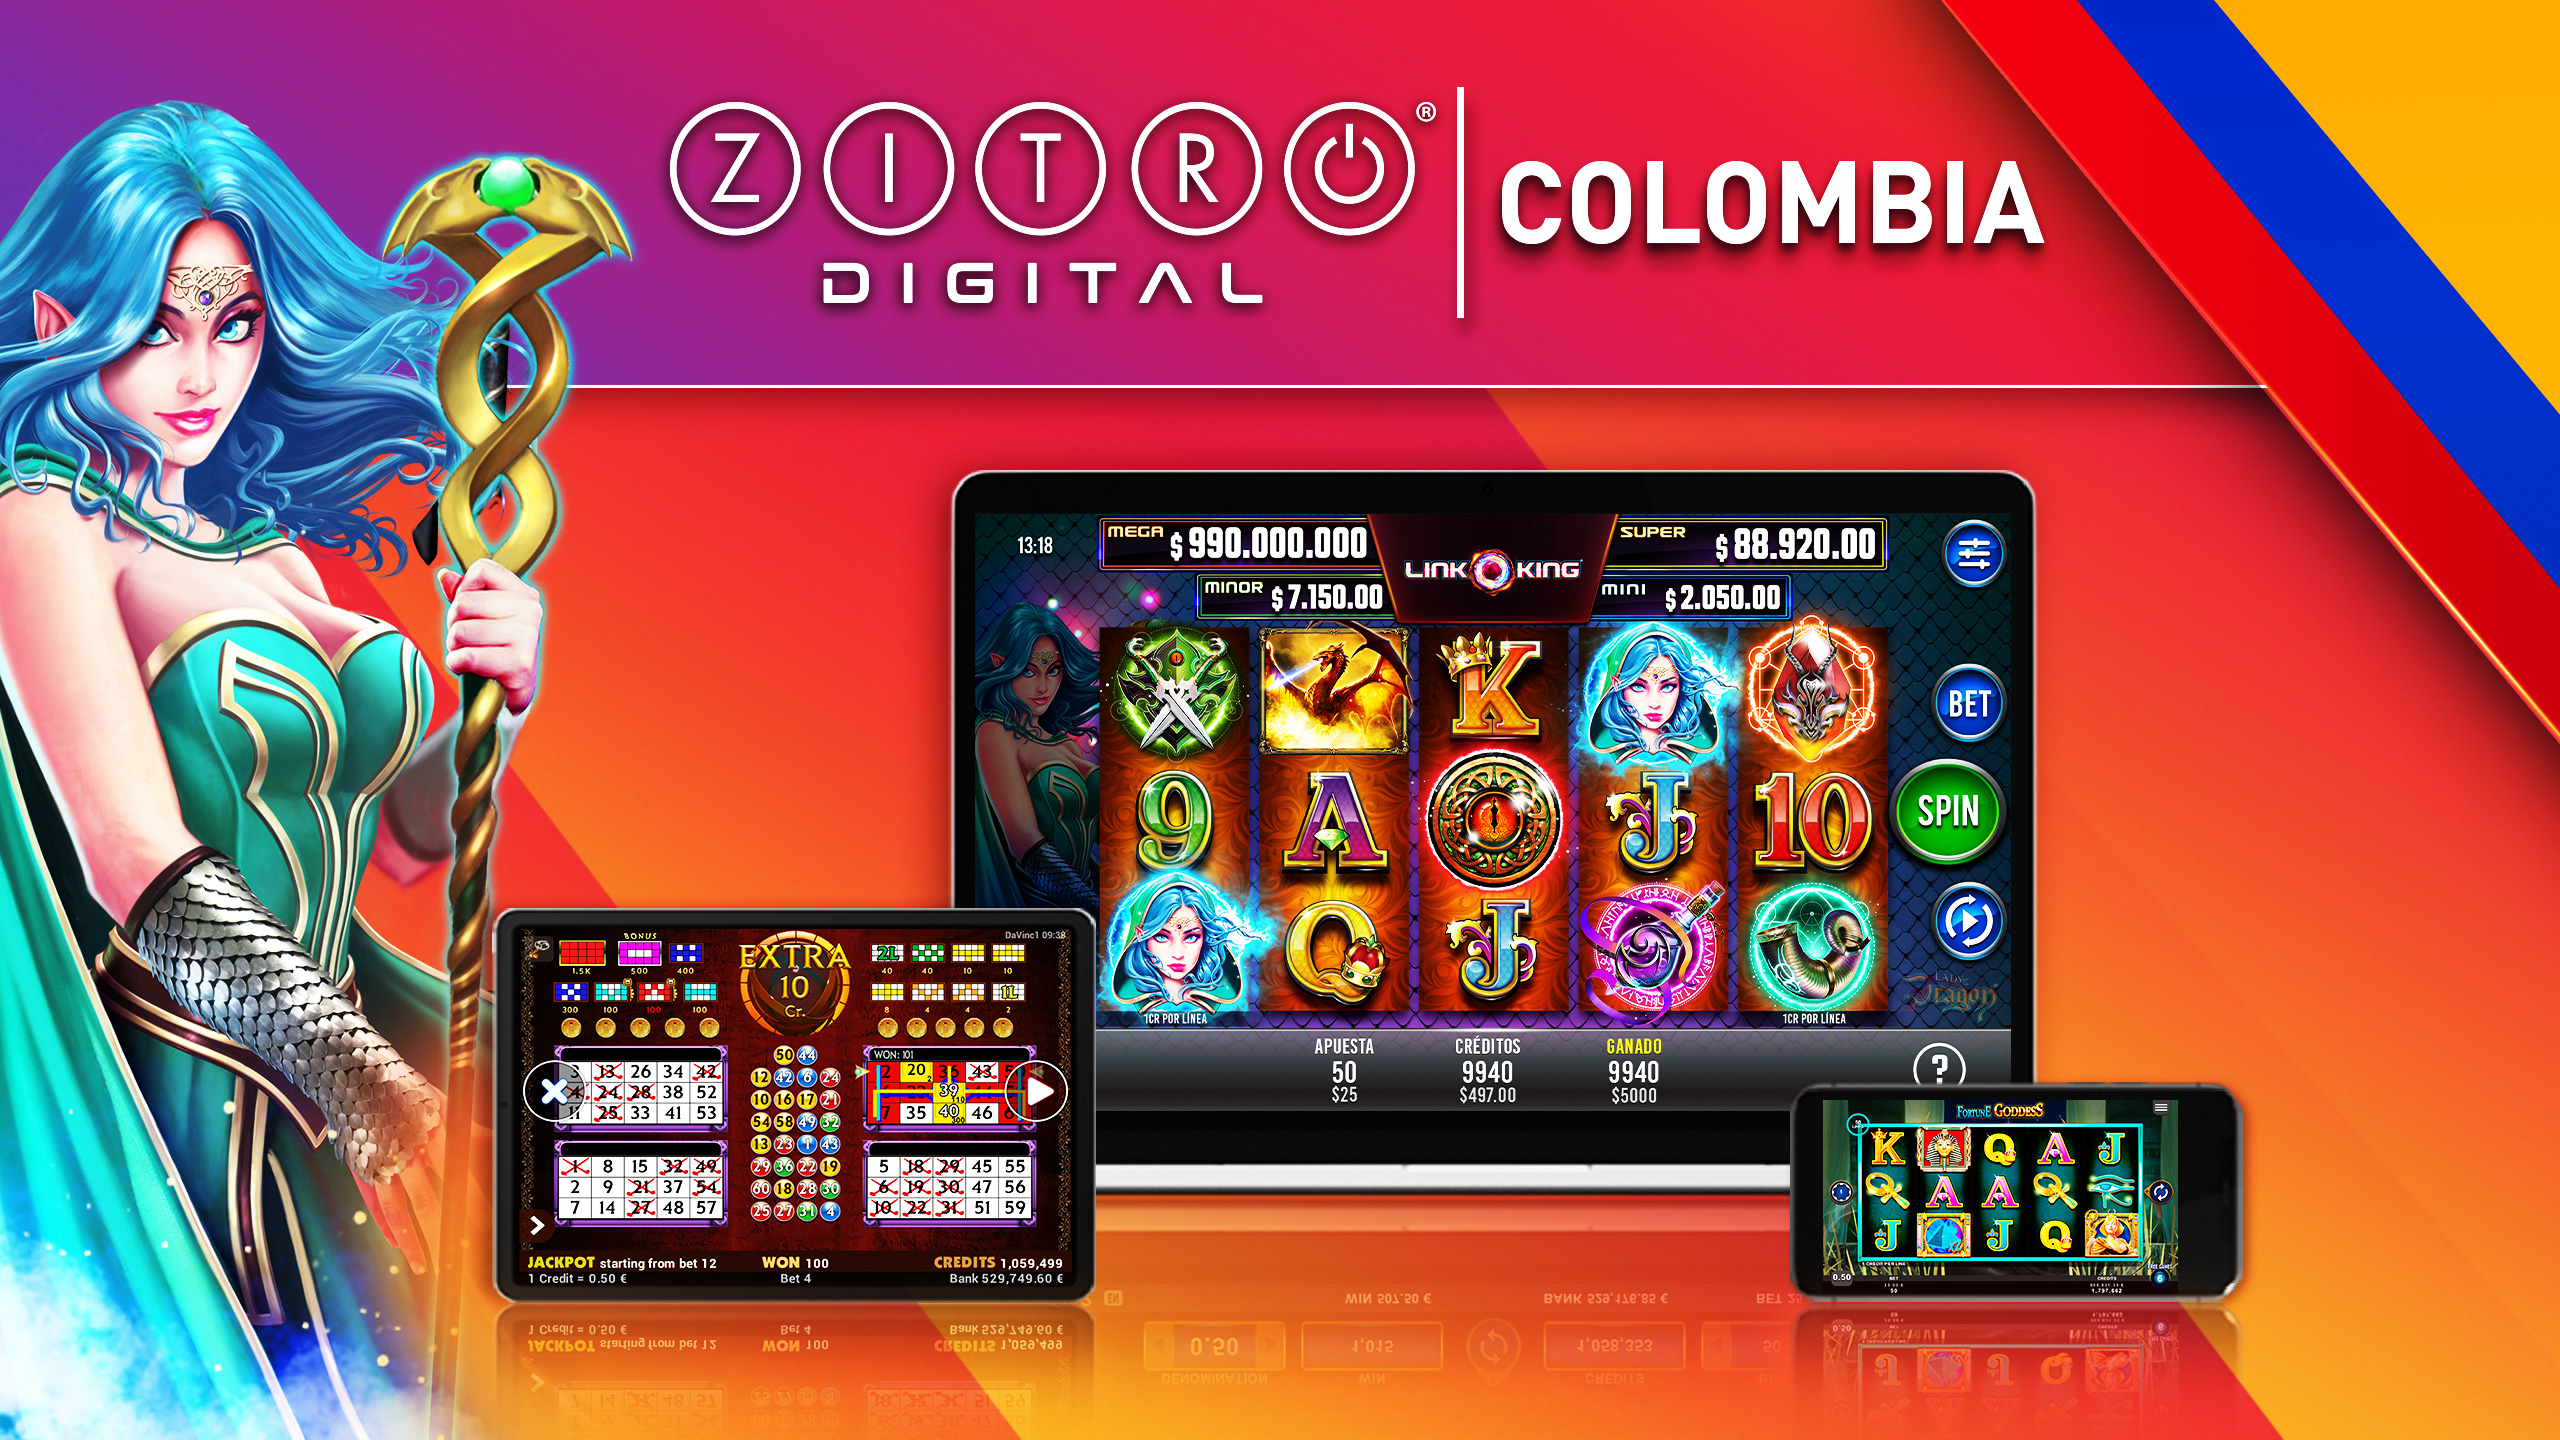 ZITRO DIGITAL READY TO SUCCEED IN ONLINE CASINOS IN COLOMBIA